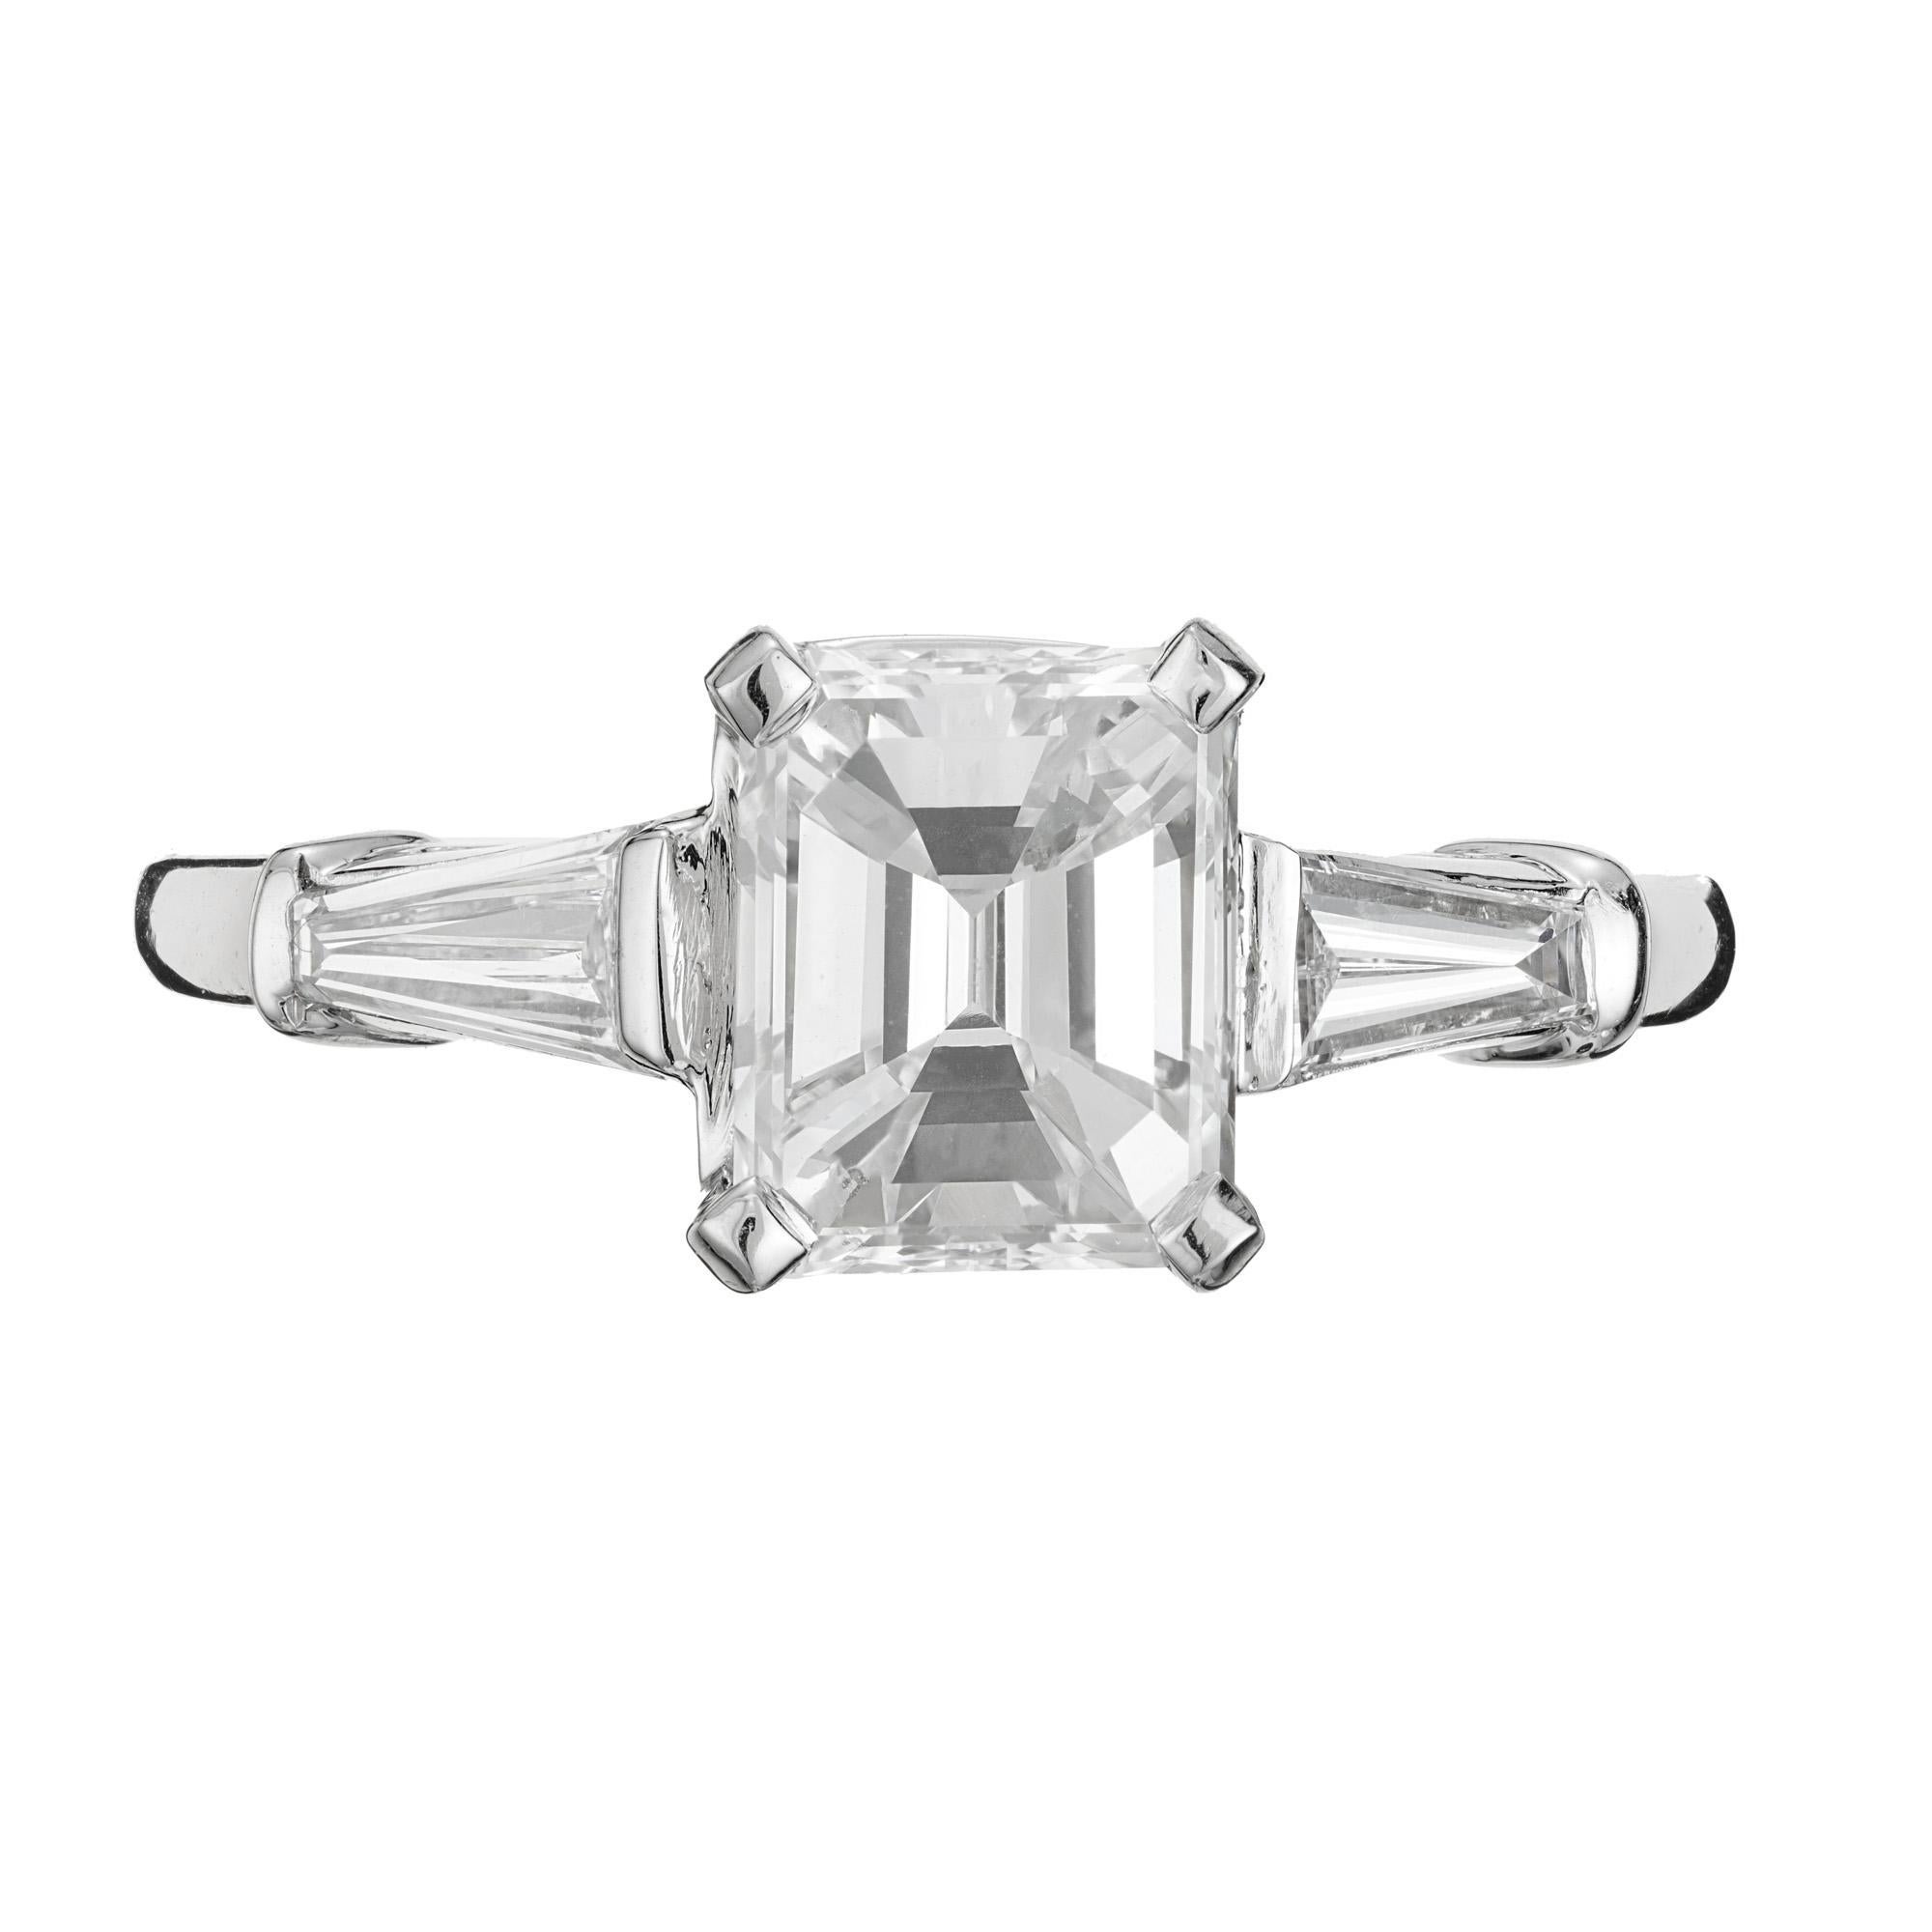 Emerald step and baguette cut diamond ring. GIA certified emerald cut center diamond set in a platinum three-stone engagement setting with two tapered baguette side diamonds. The center diamond is from a 1920's ring with excellent sparkle and a